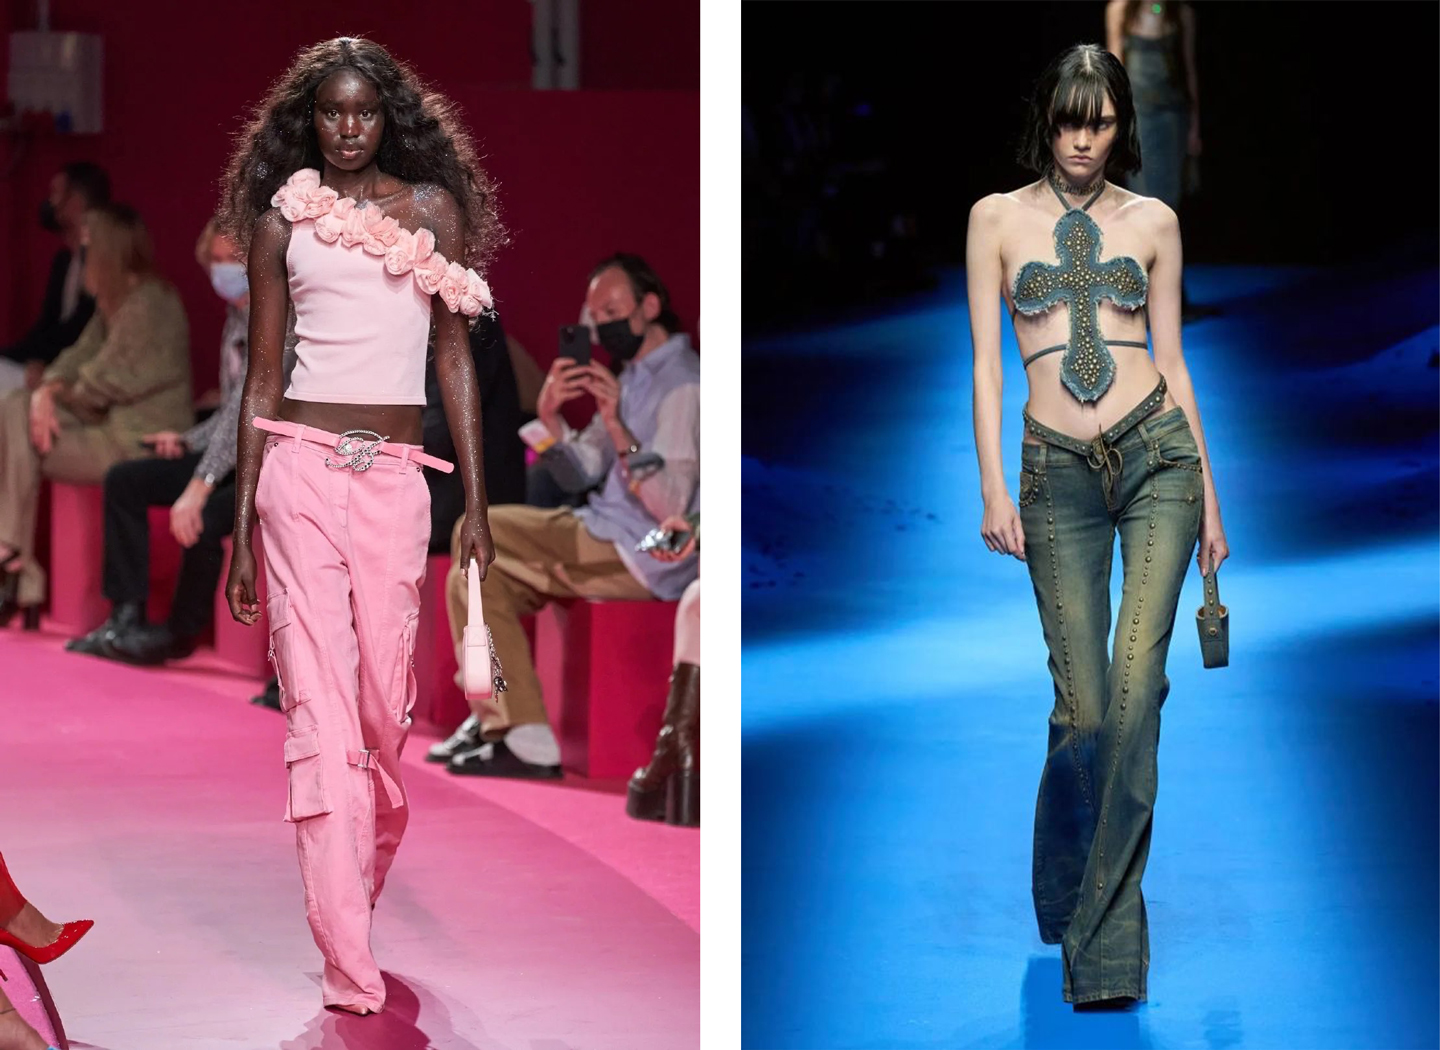 Blumarine by Istituto Marangoni alumnus Nicola Brognano has brought the 2000s back nto fashion. From left to right: looks from the Blumarine spring-summer 2022 and spring-summer 2023 collections